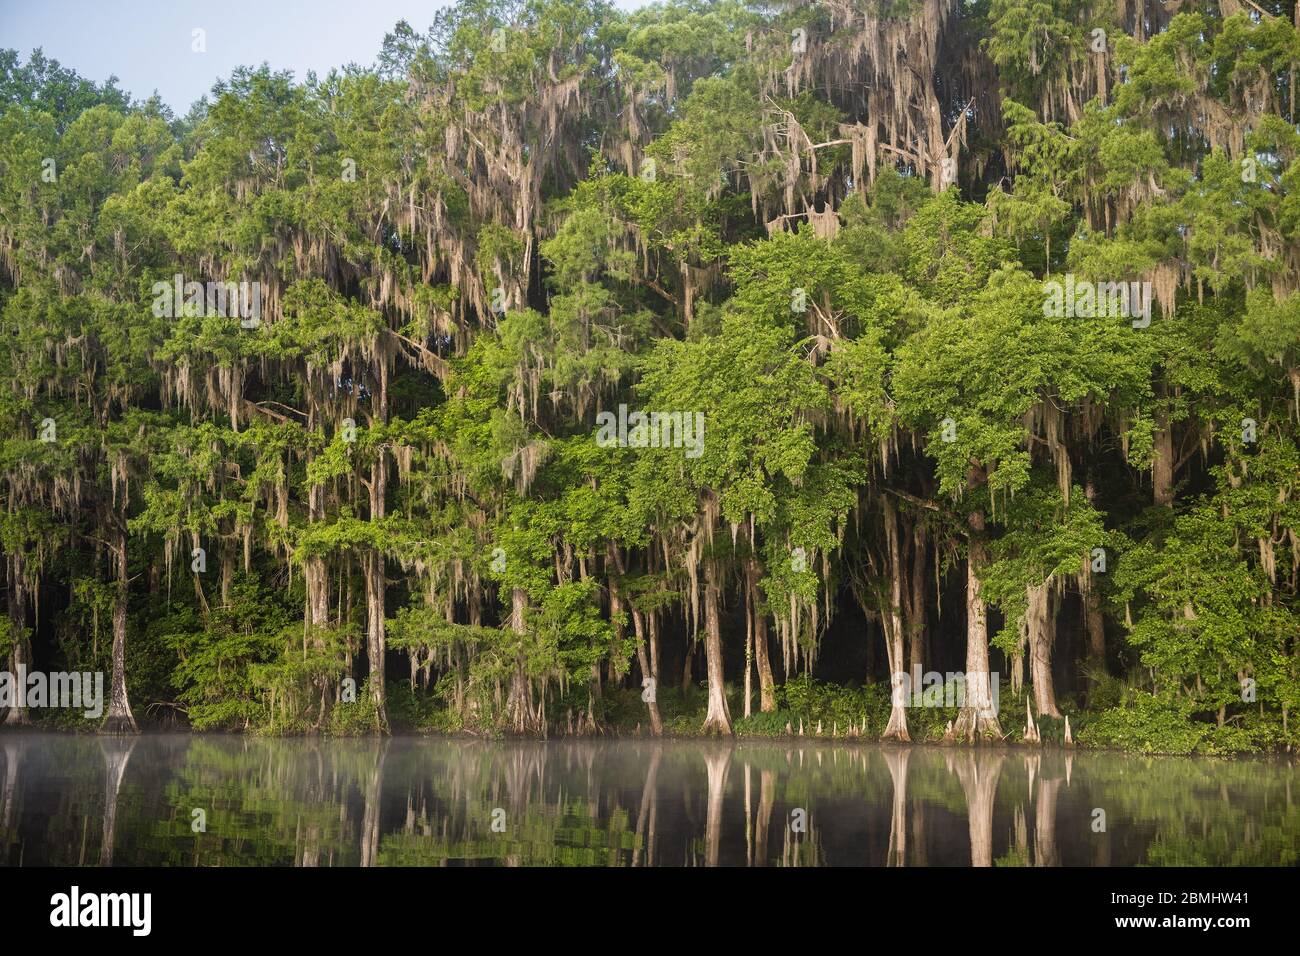 Cypress trees drapped in Spanish moss, Cypress knees and other vegetation along the bank of the Withlacoochee River. Dunnellon, Florida. Marion County Stock Photo